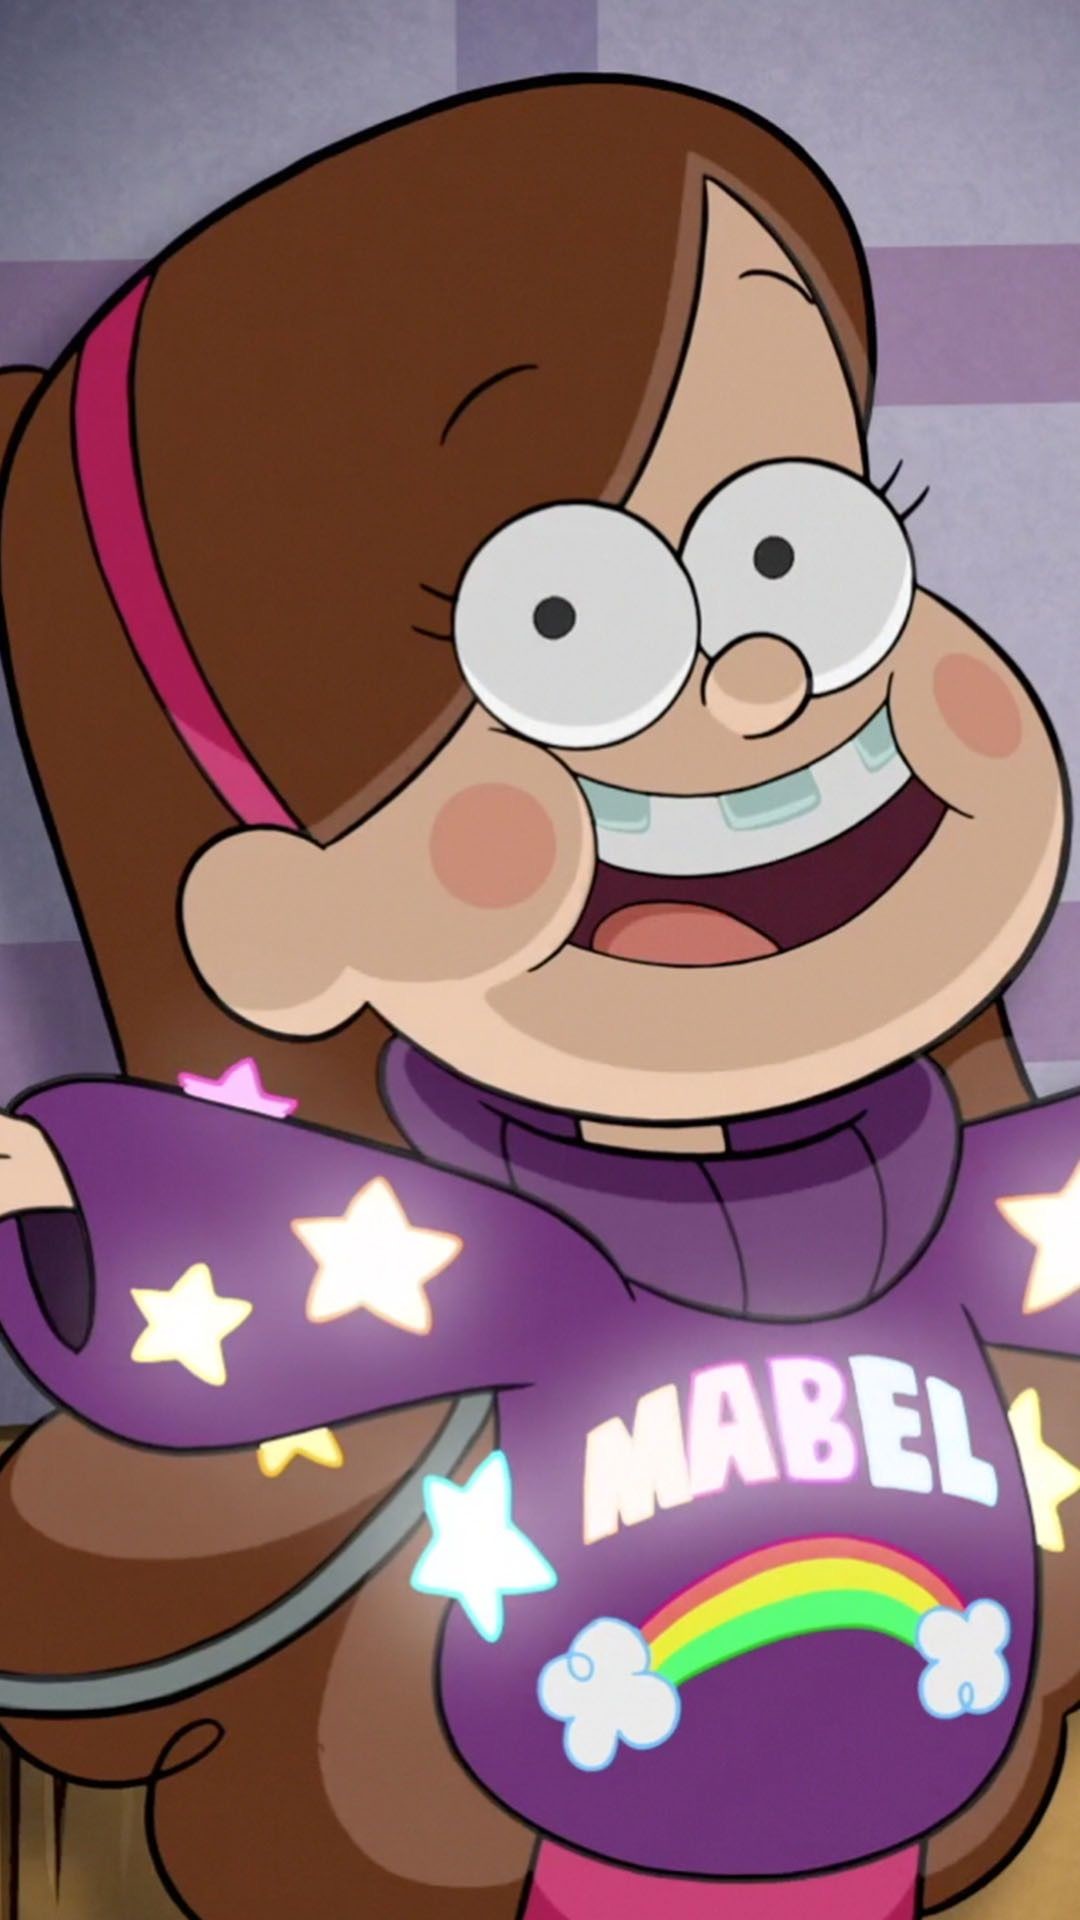 Anime Girl Style Wallpaper - Mabel Pines Wallpaper Iphone Hd , HD Wallpaper & Backgrounds